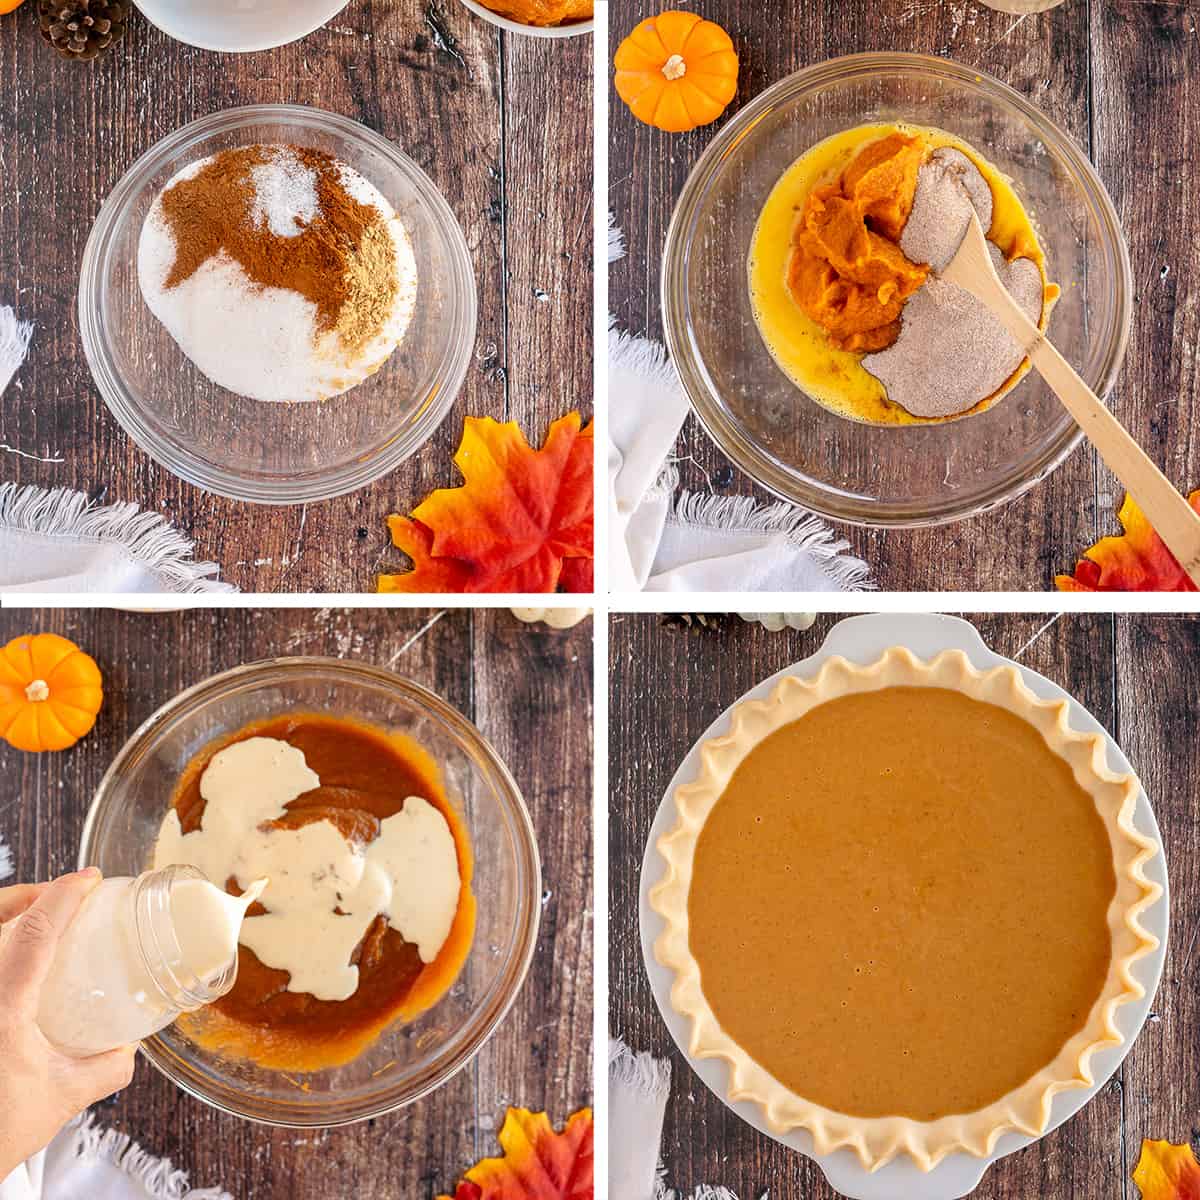 Ingredients for pumpkin pie are combined in a large mixing bowl and then poured in a pie crust.